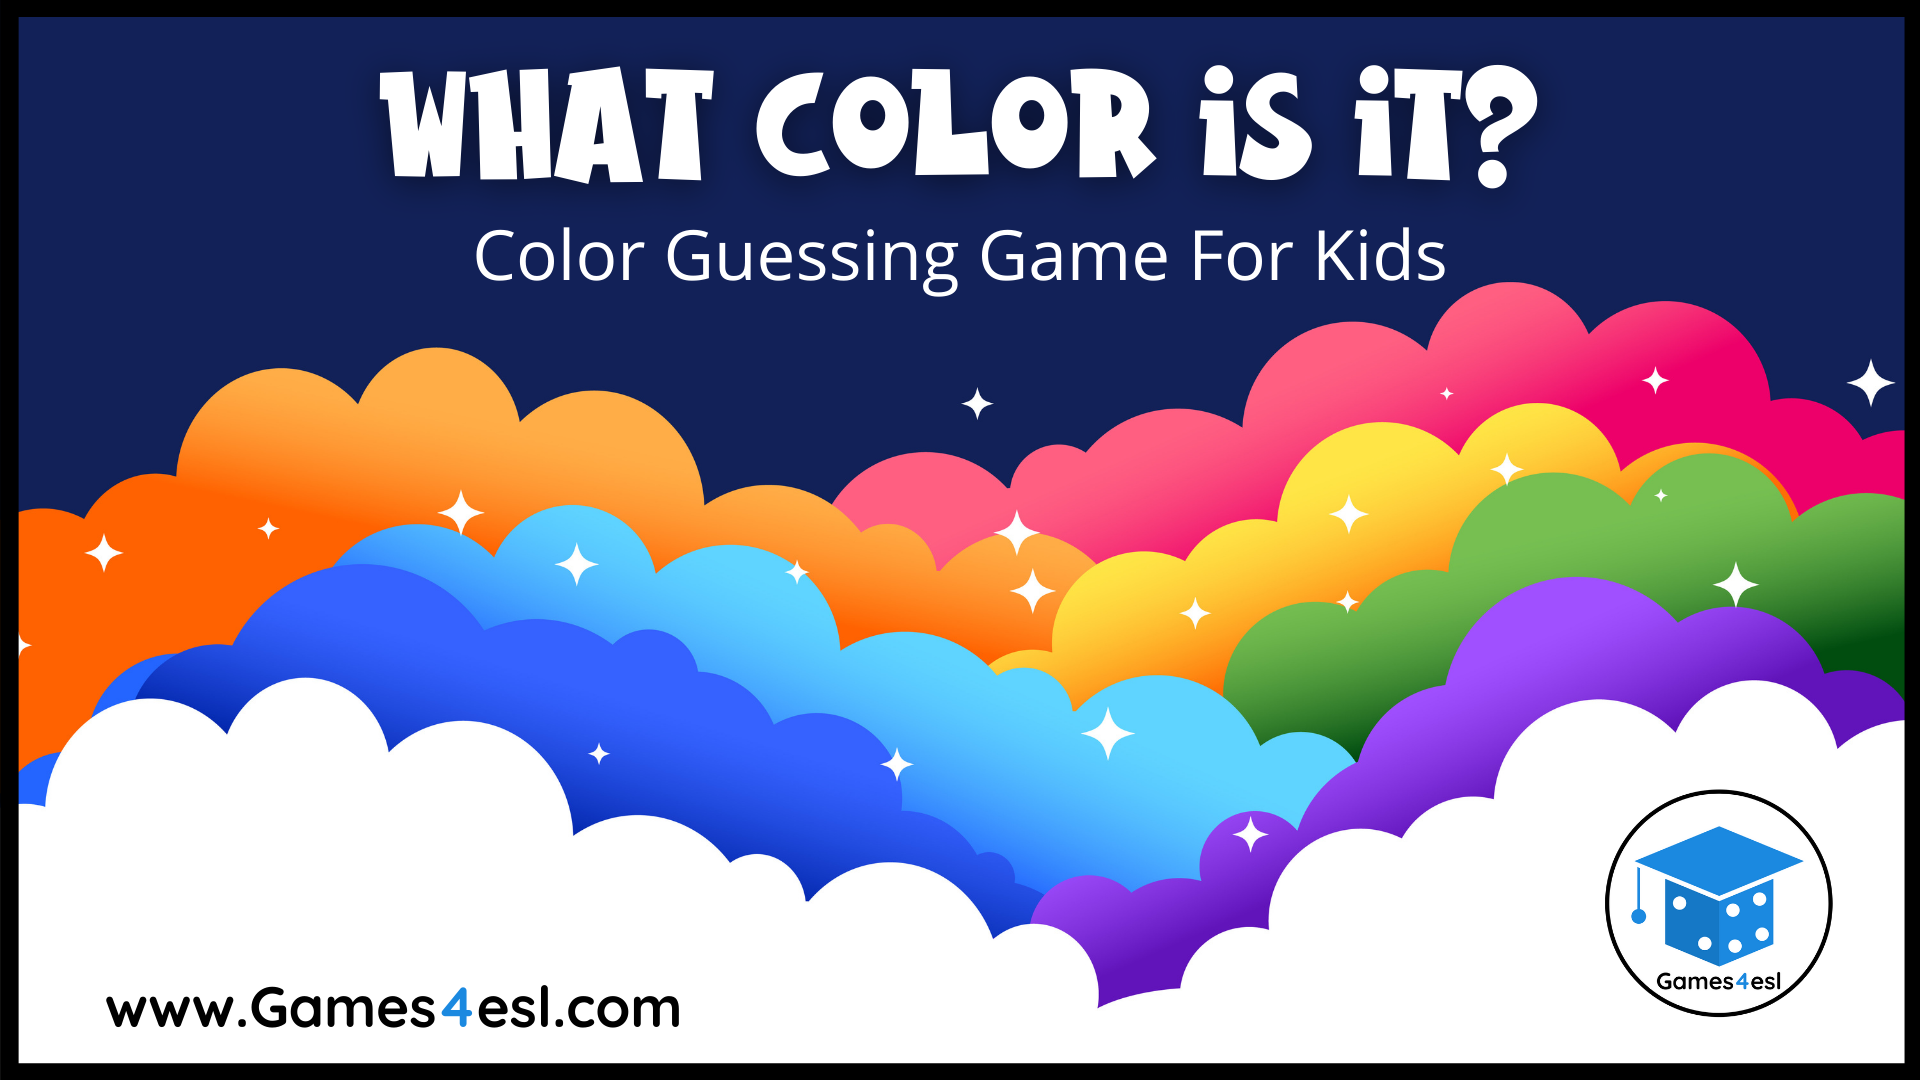 What Color Is It?, Color Games For Kids